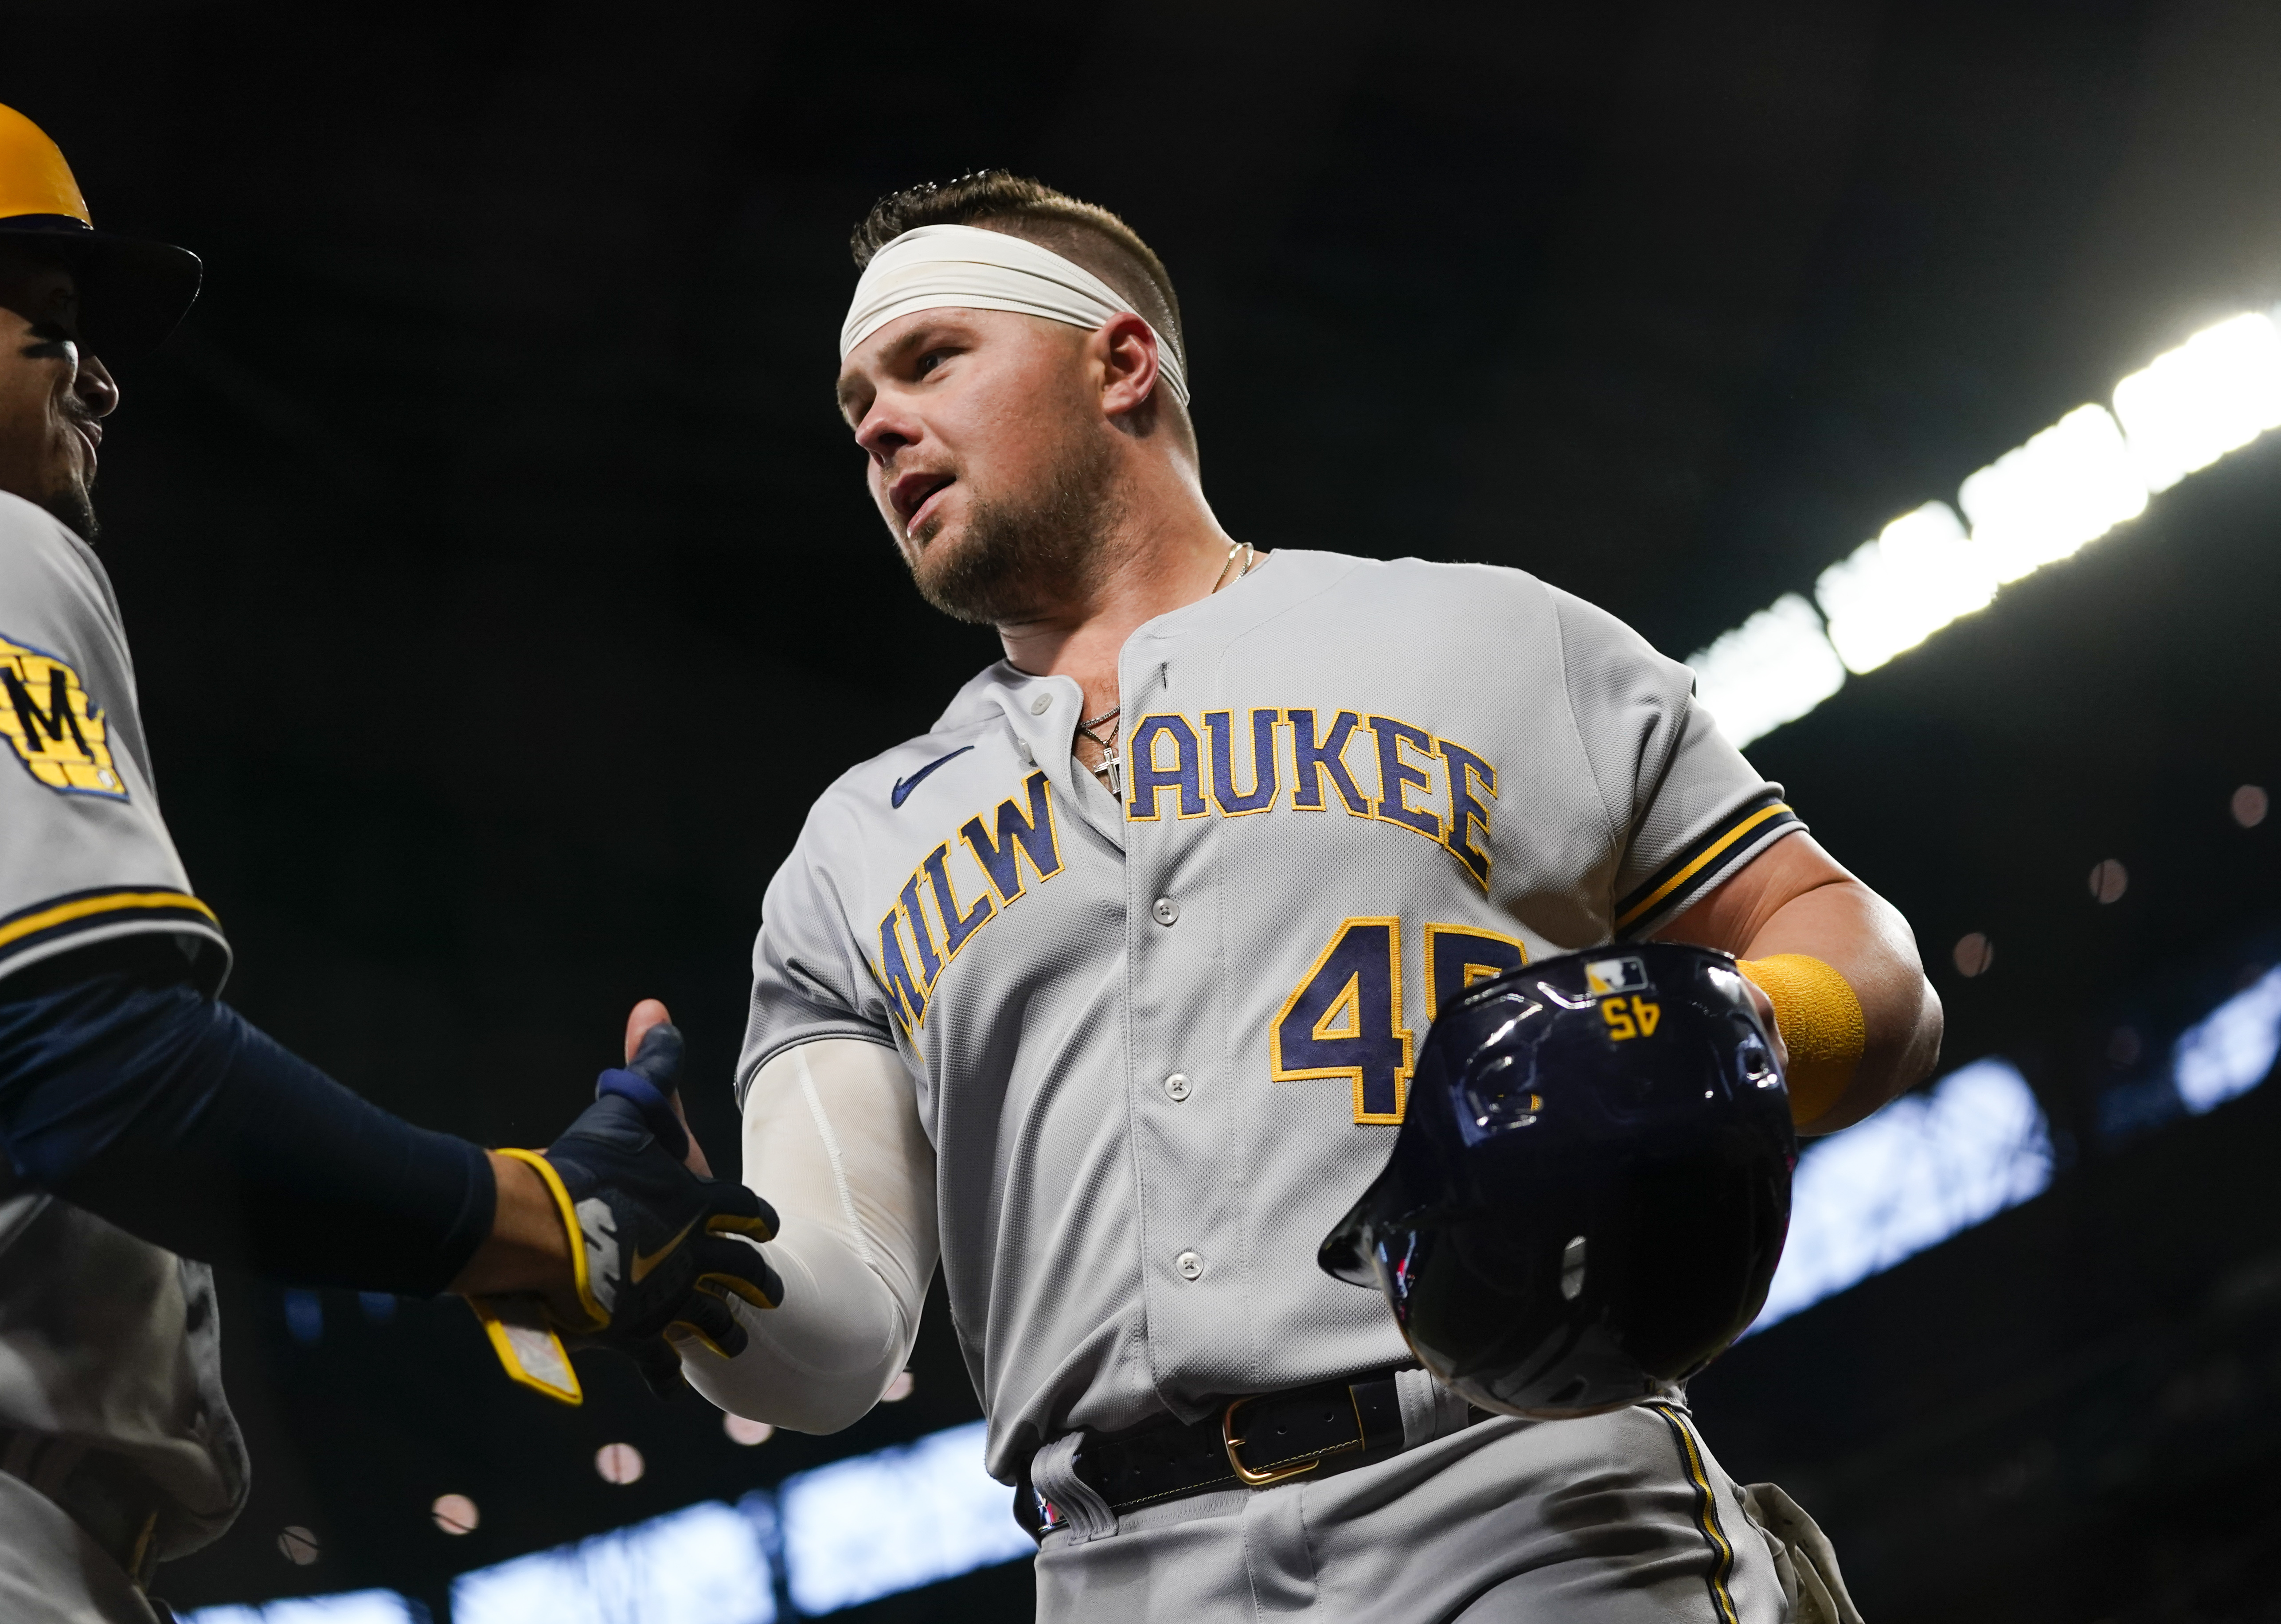 Luke Voit signs minor league contract with Mets after Brewers release